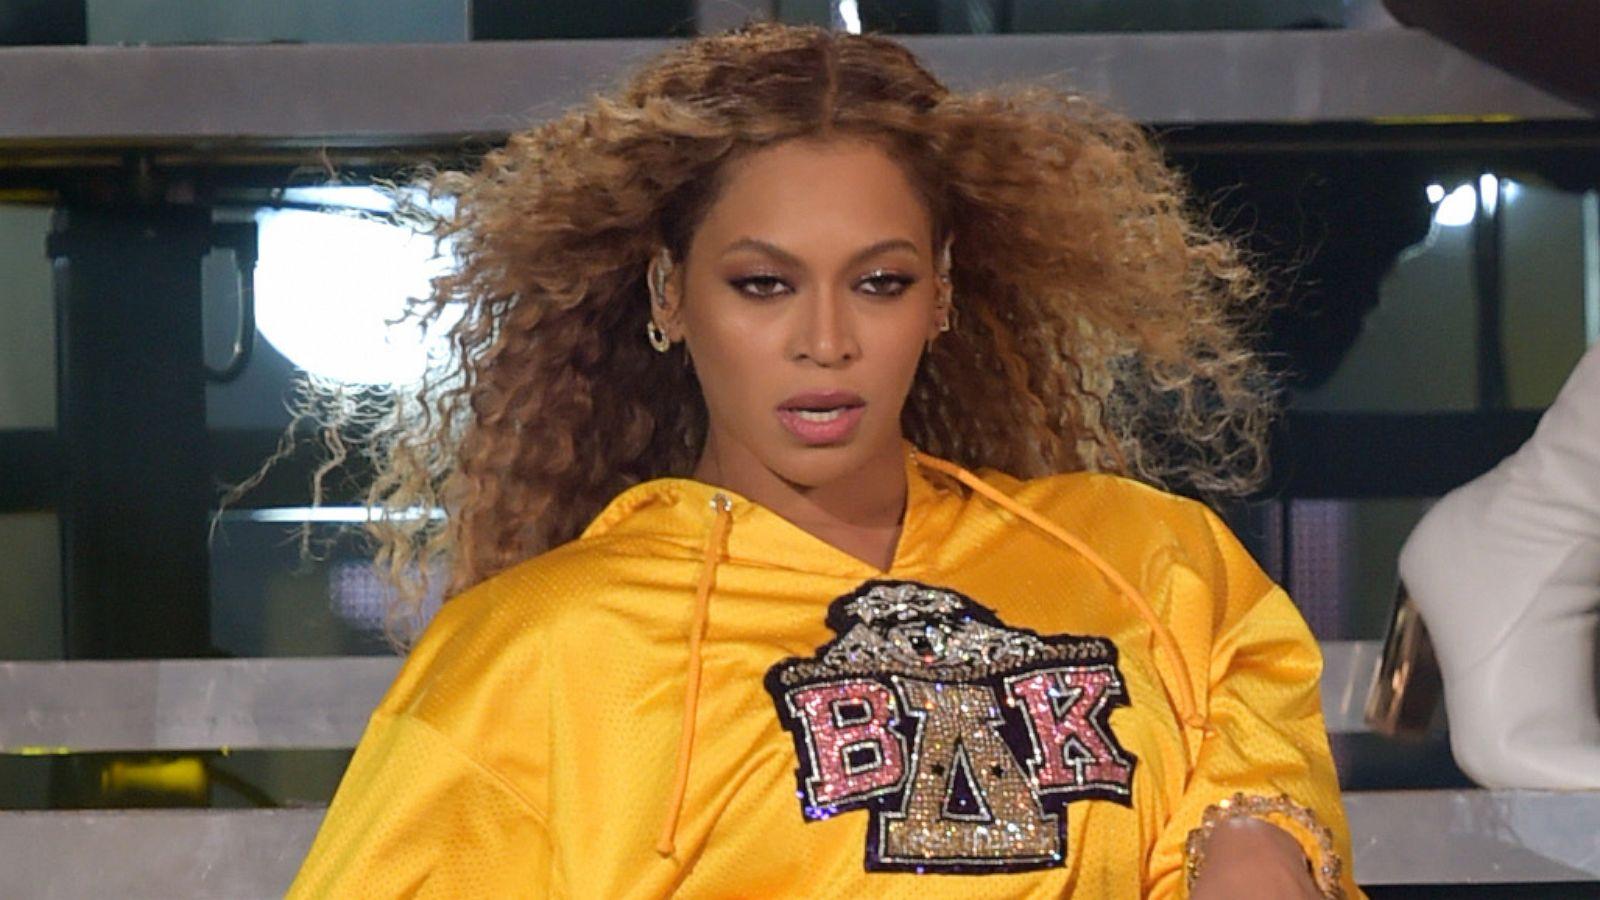 Beyonce's #BeforeILetGoChallenge puts all other challenges